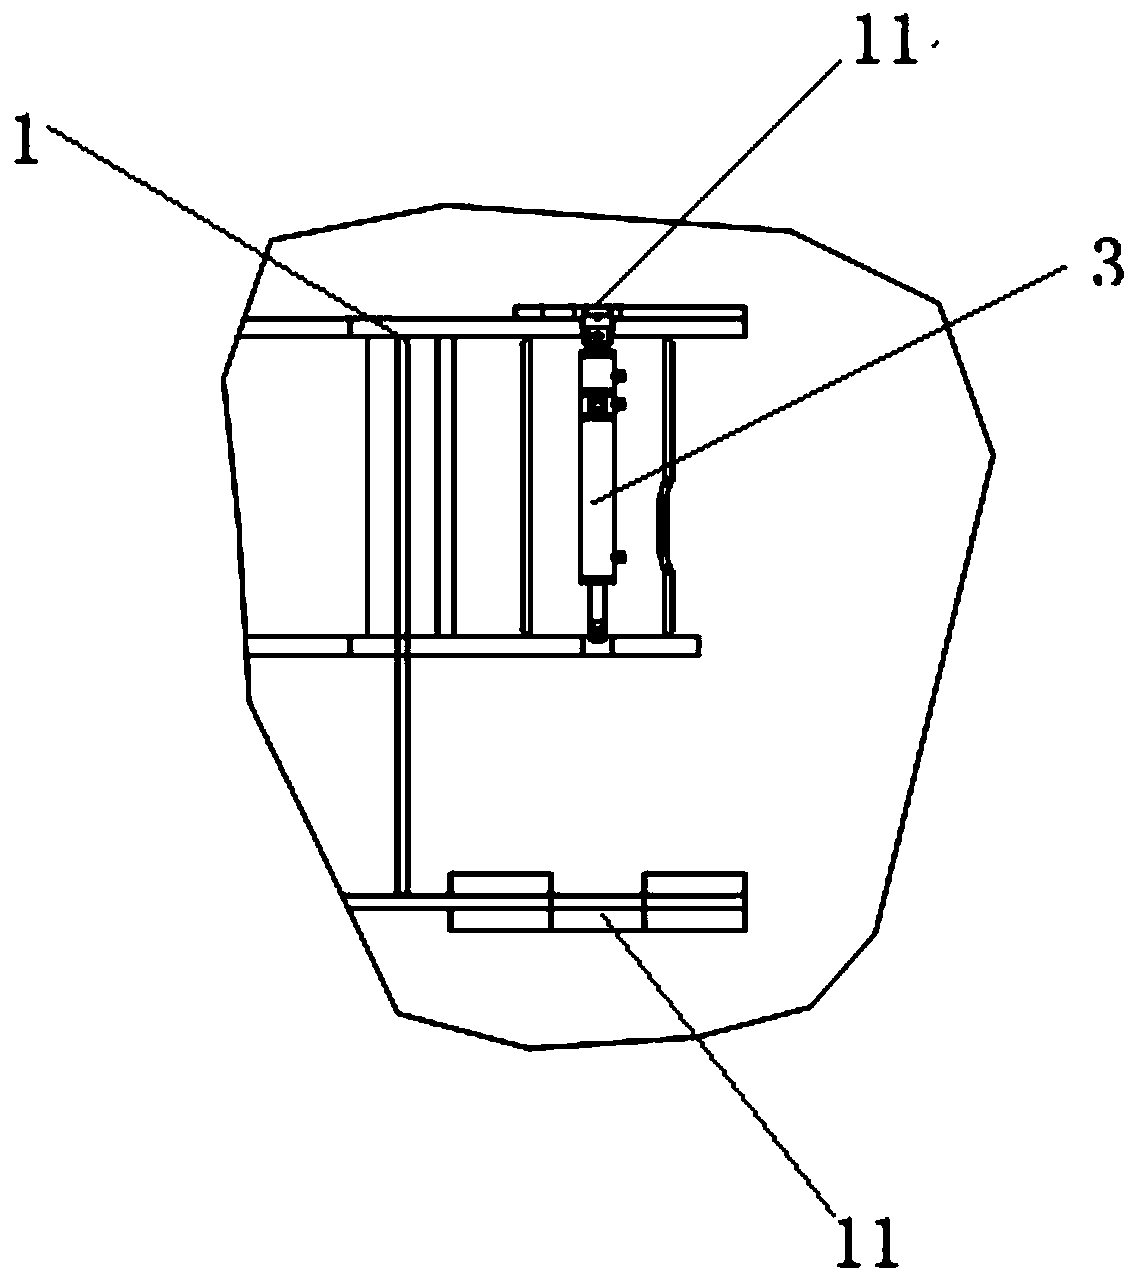 Insert and pull connection structure, supporting leg and frame connection assembly and crane